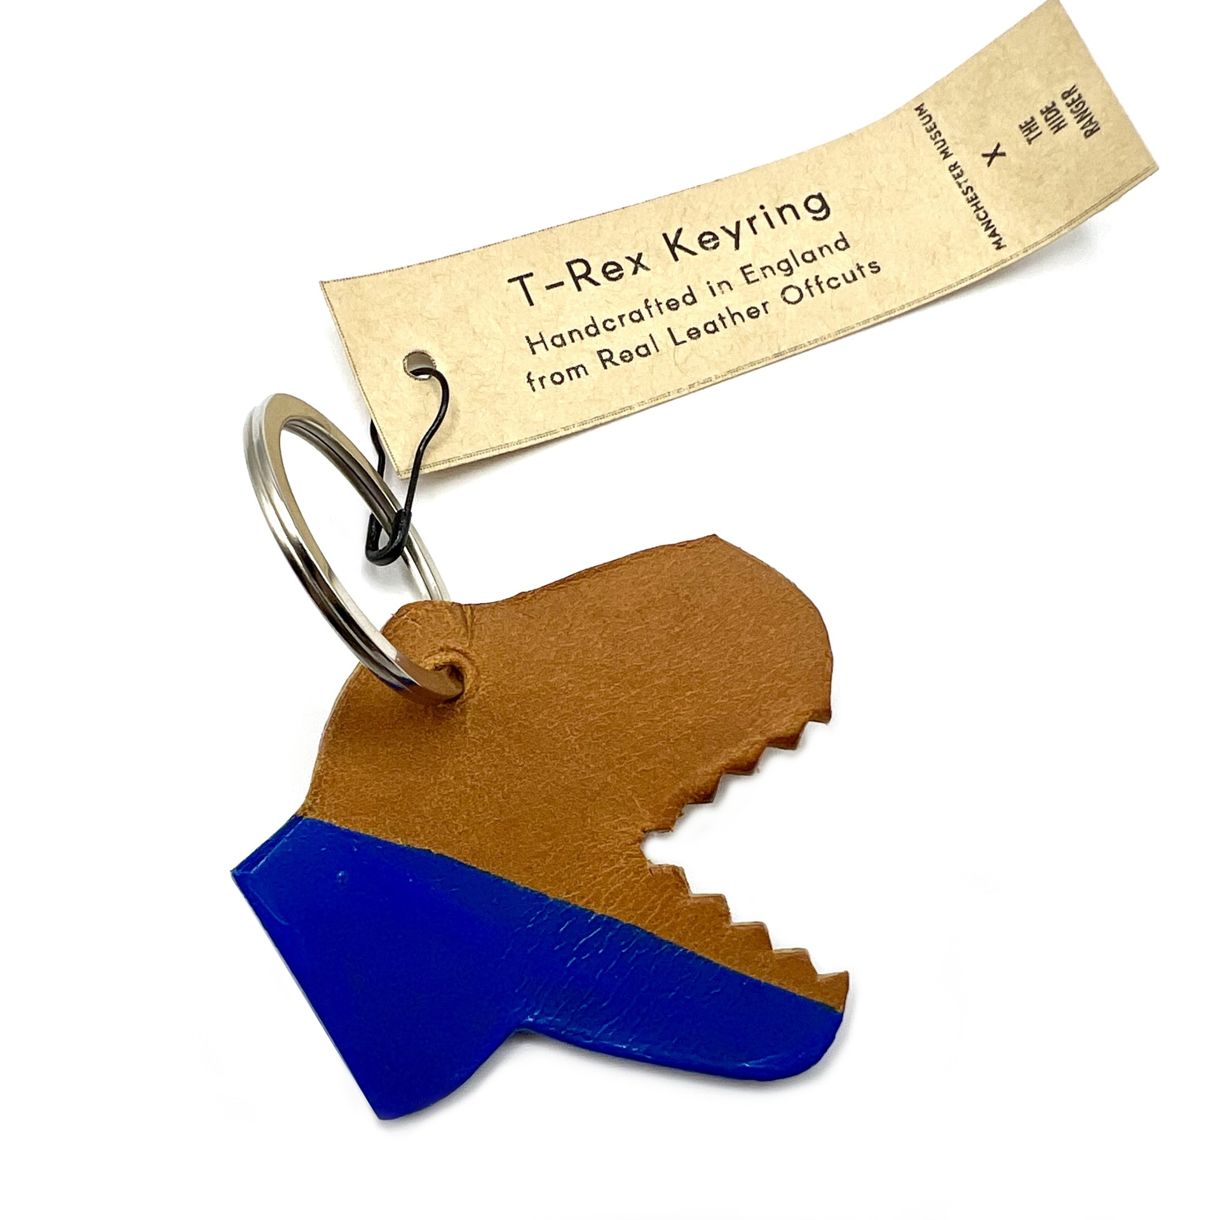 A T. rex head shaped keyring with open, toothed mouth. The bottom half of the head is painted blue. The keyring is where the eye would be and a paper swing tag is fastened to the keyring with a black safety pin. Tag text: T-Rex keyring. Handcrafted in England from real leather offcuts.